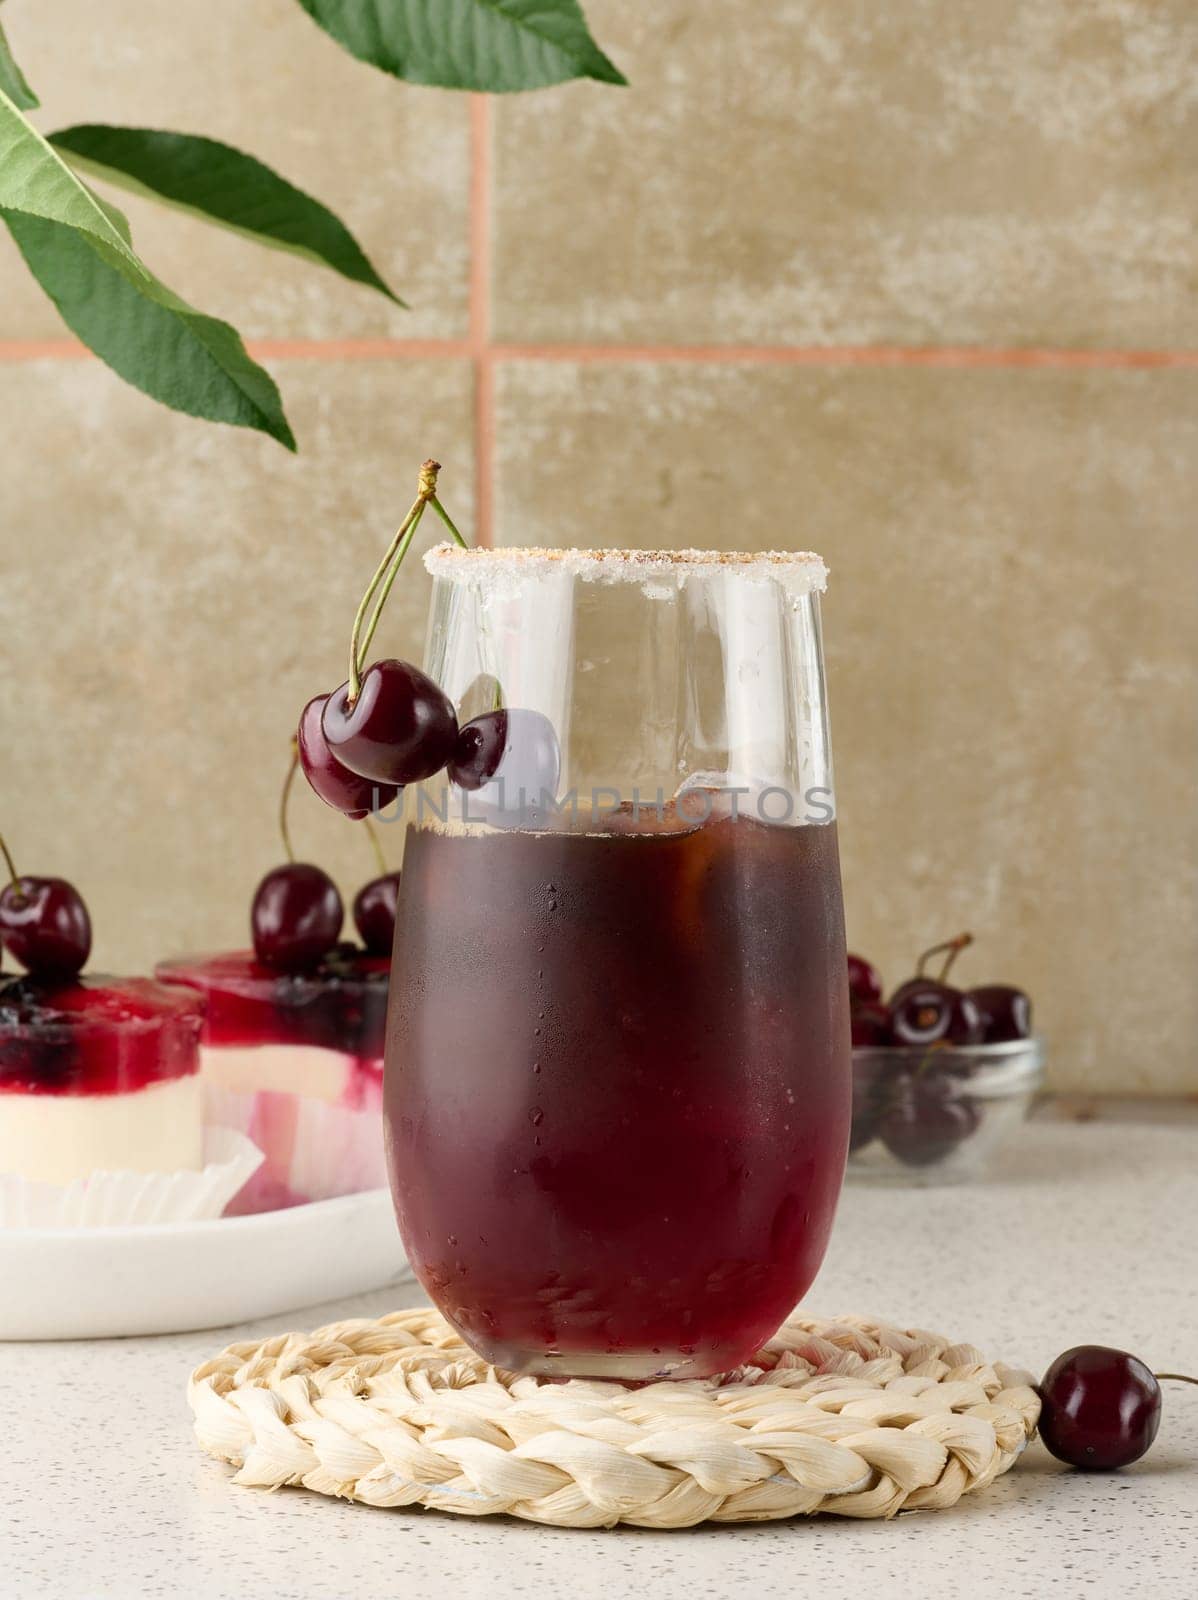 Cherry juice in a transparent glass and fresh cherries on a white table